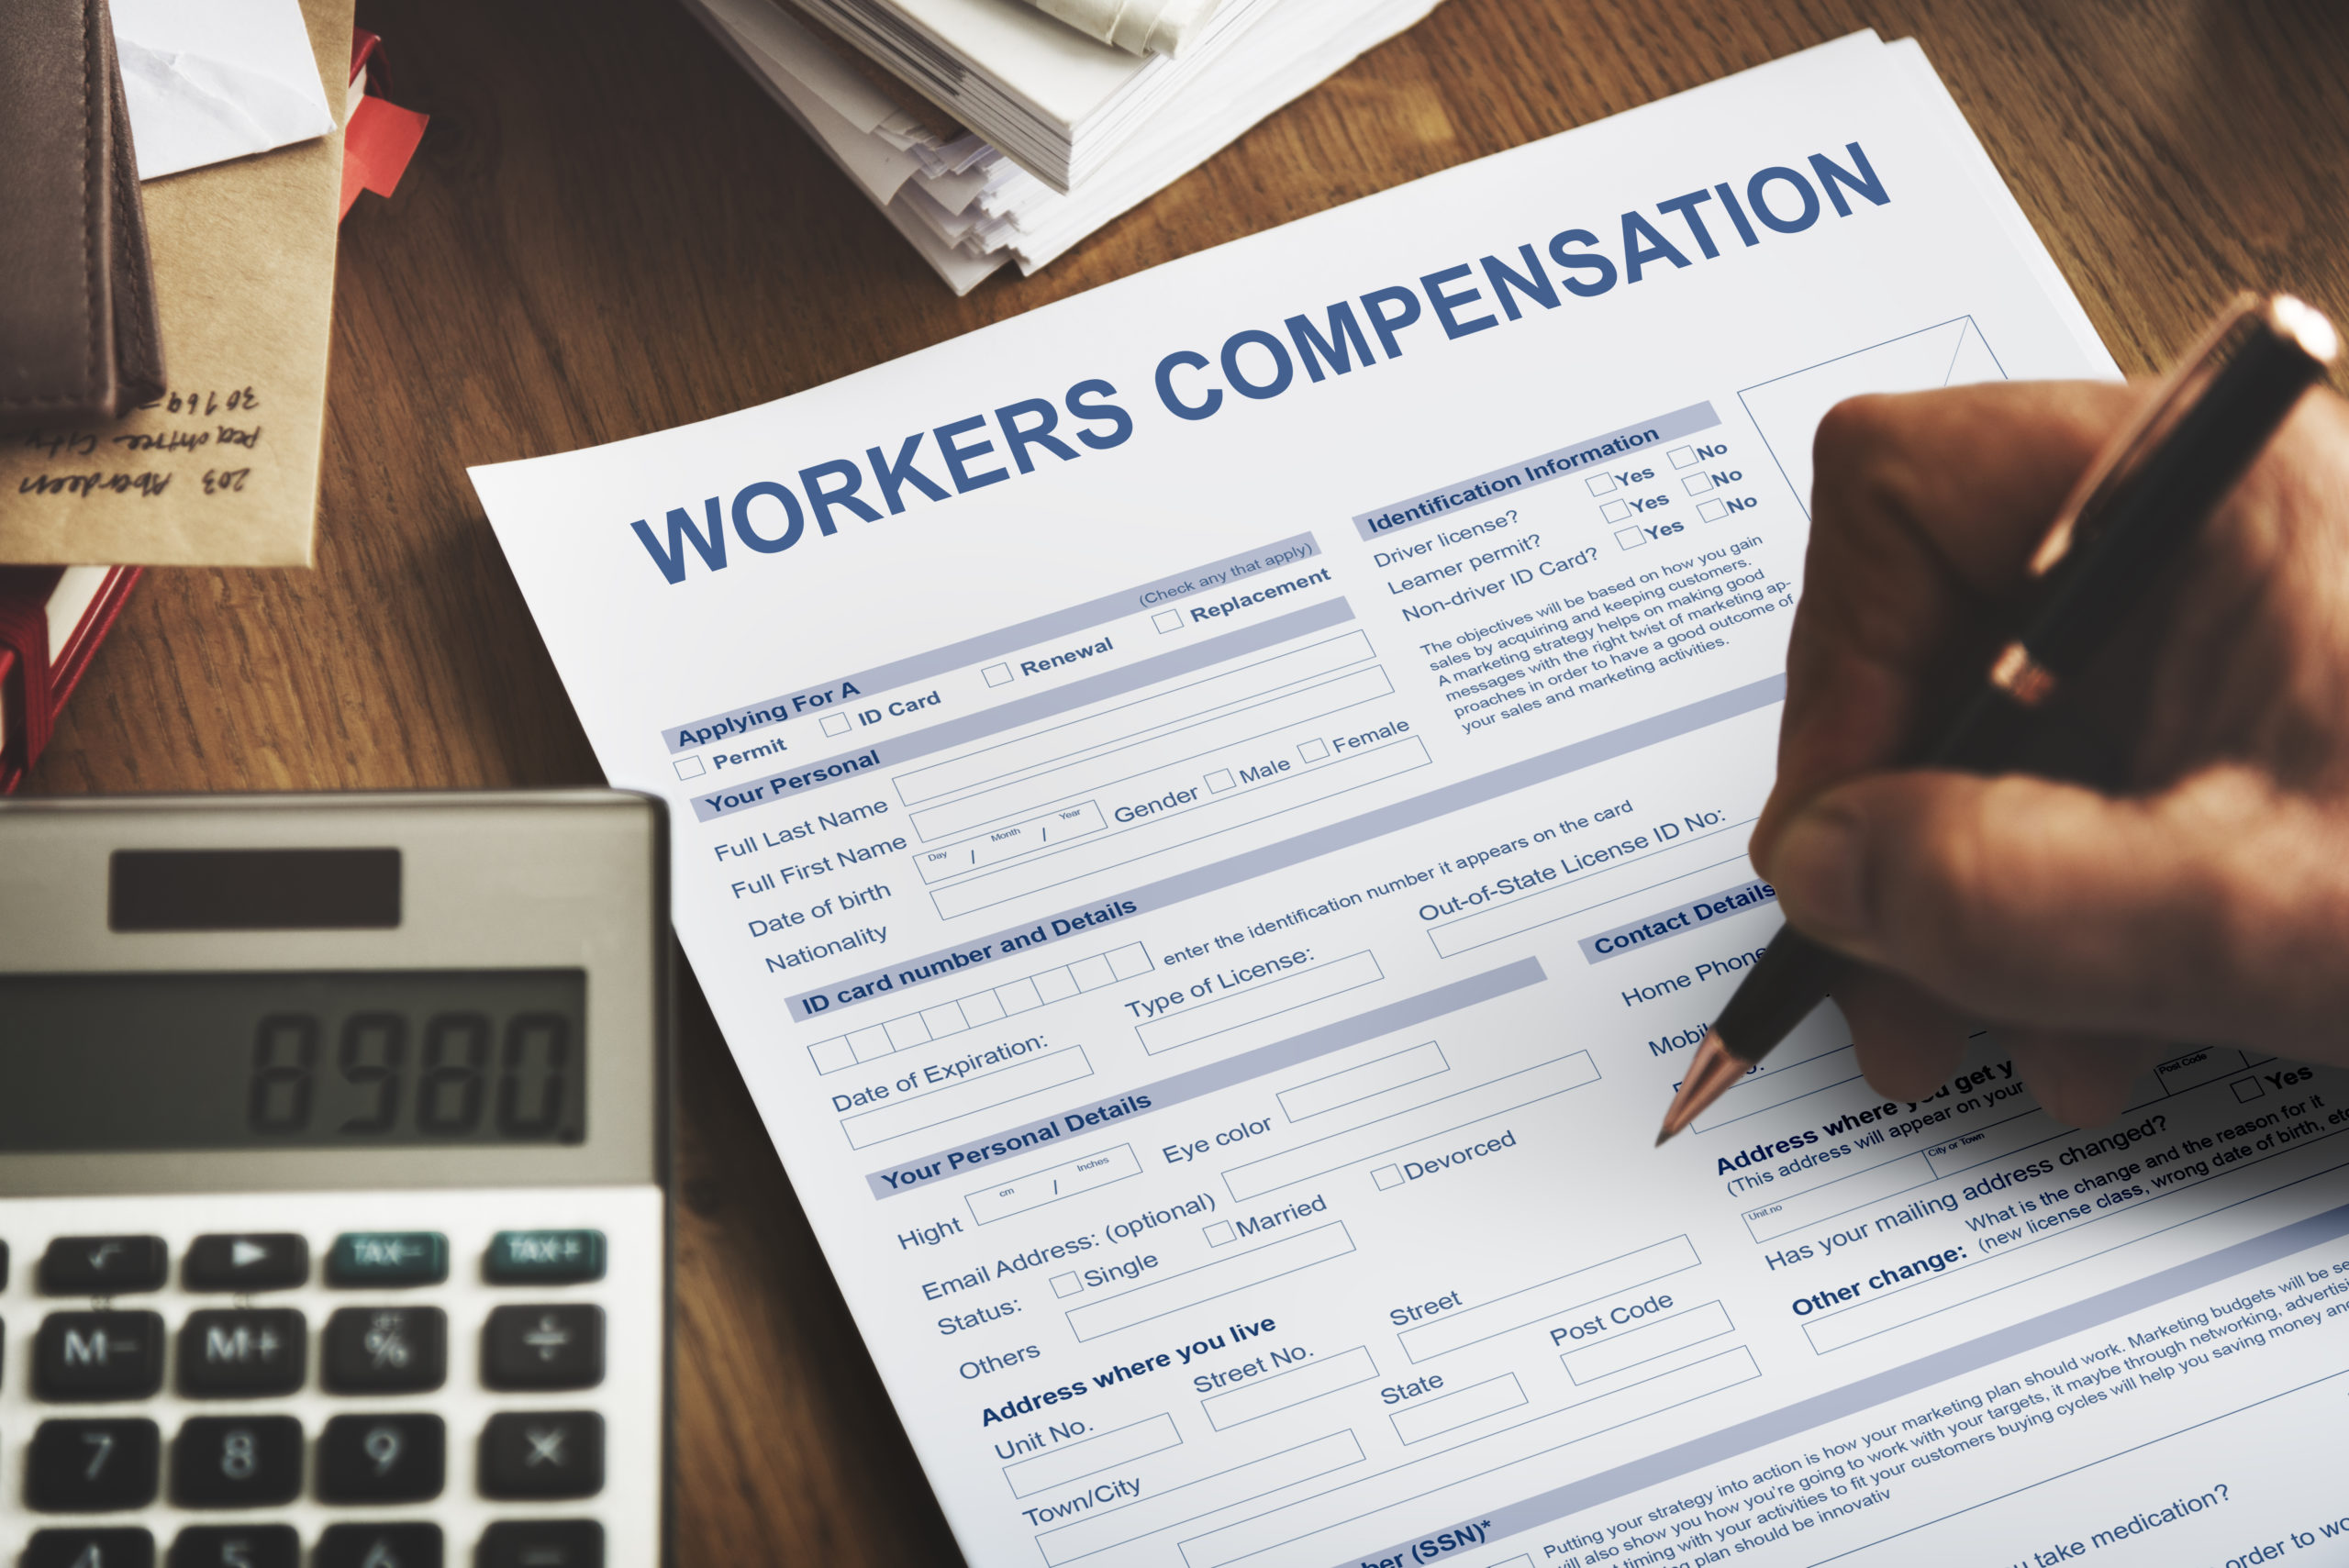 can my nj workers’ compensation be paid in full